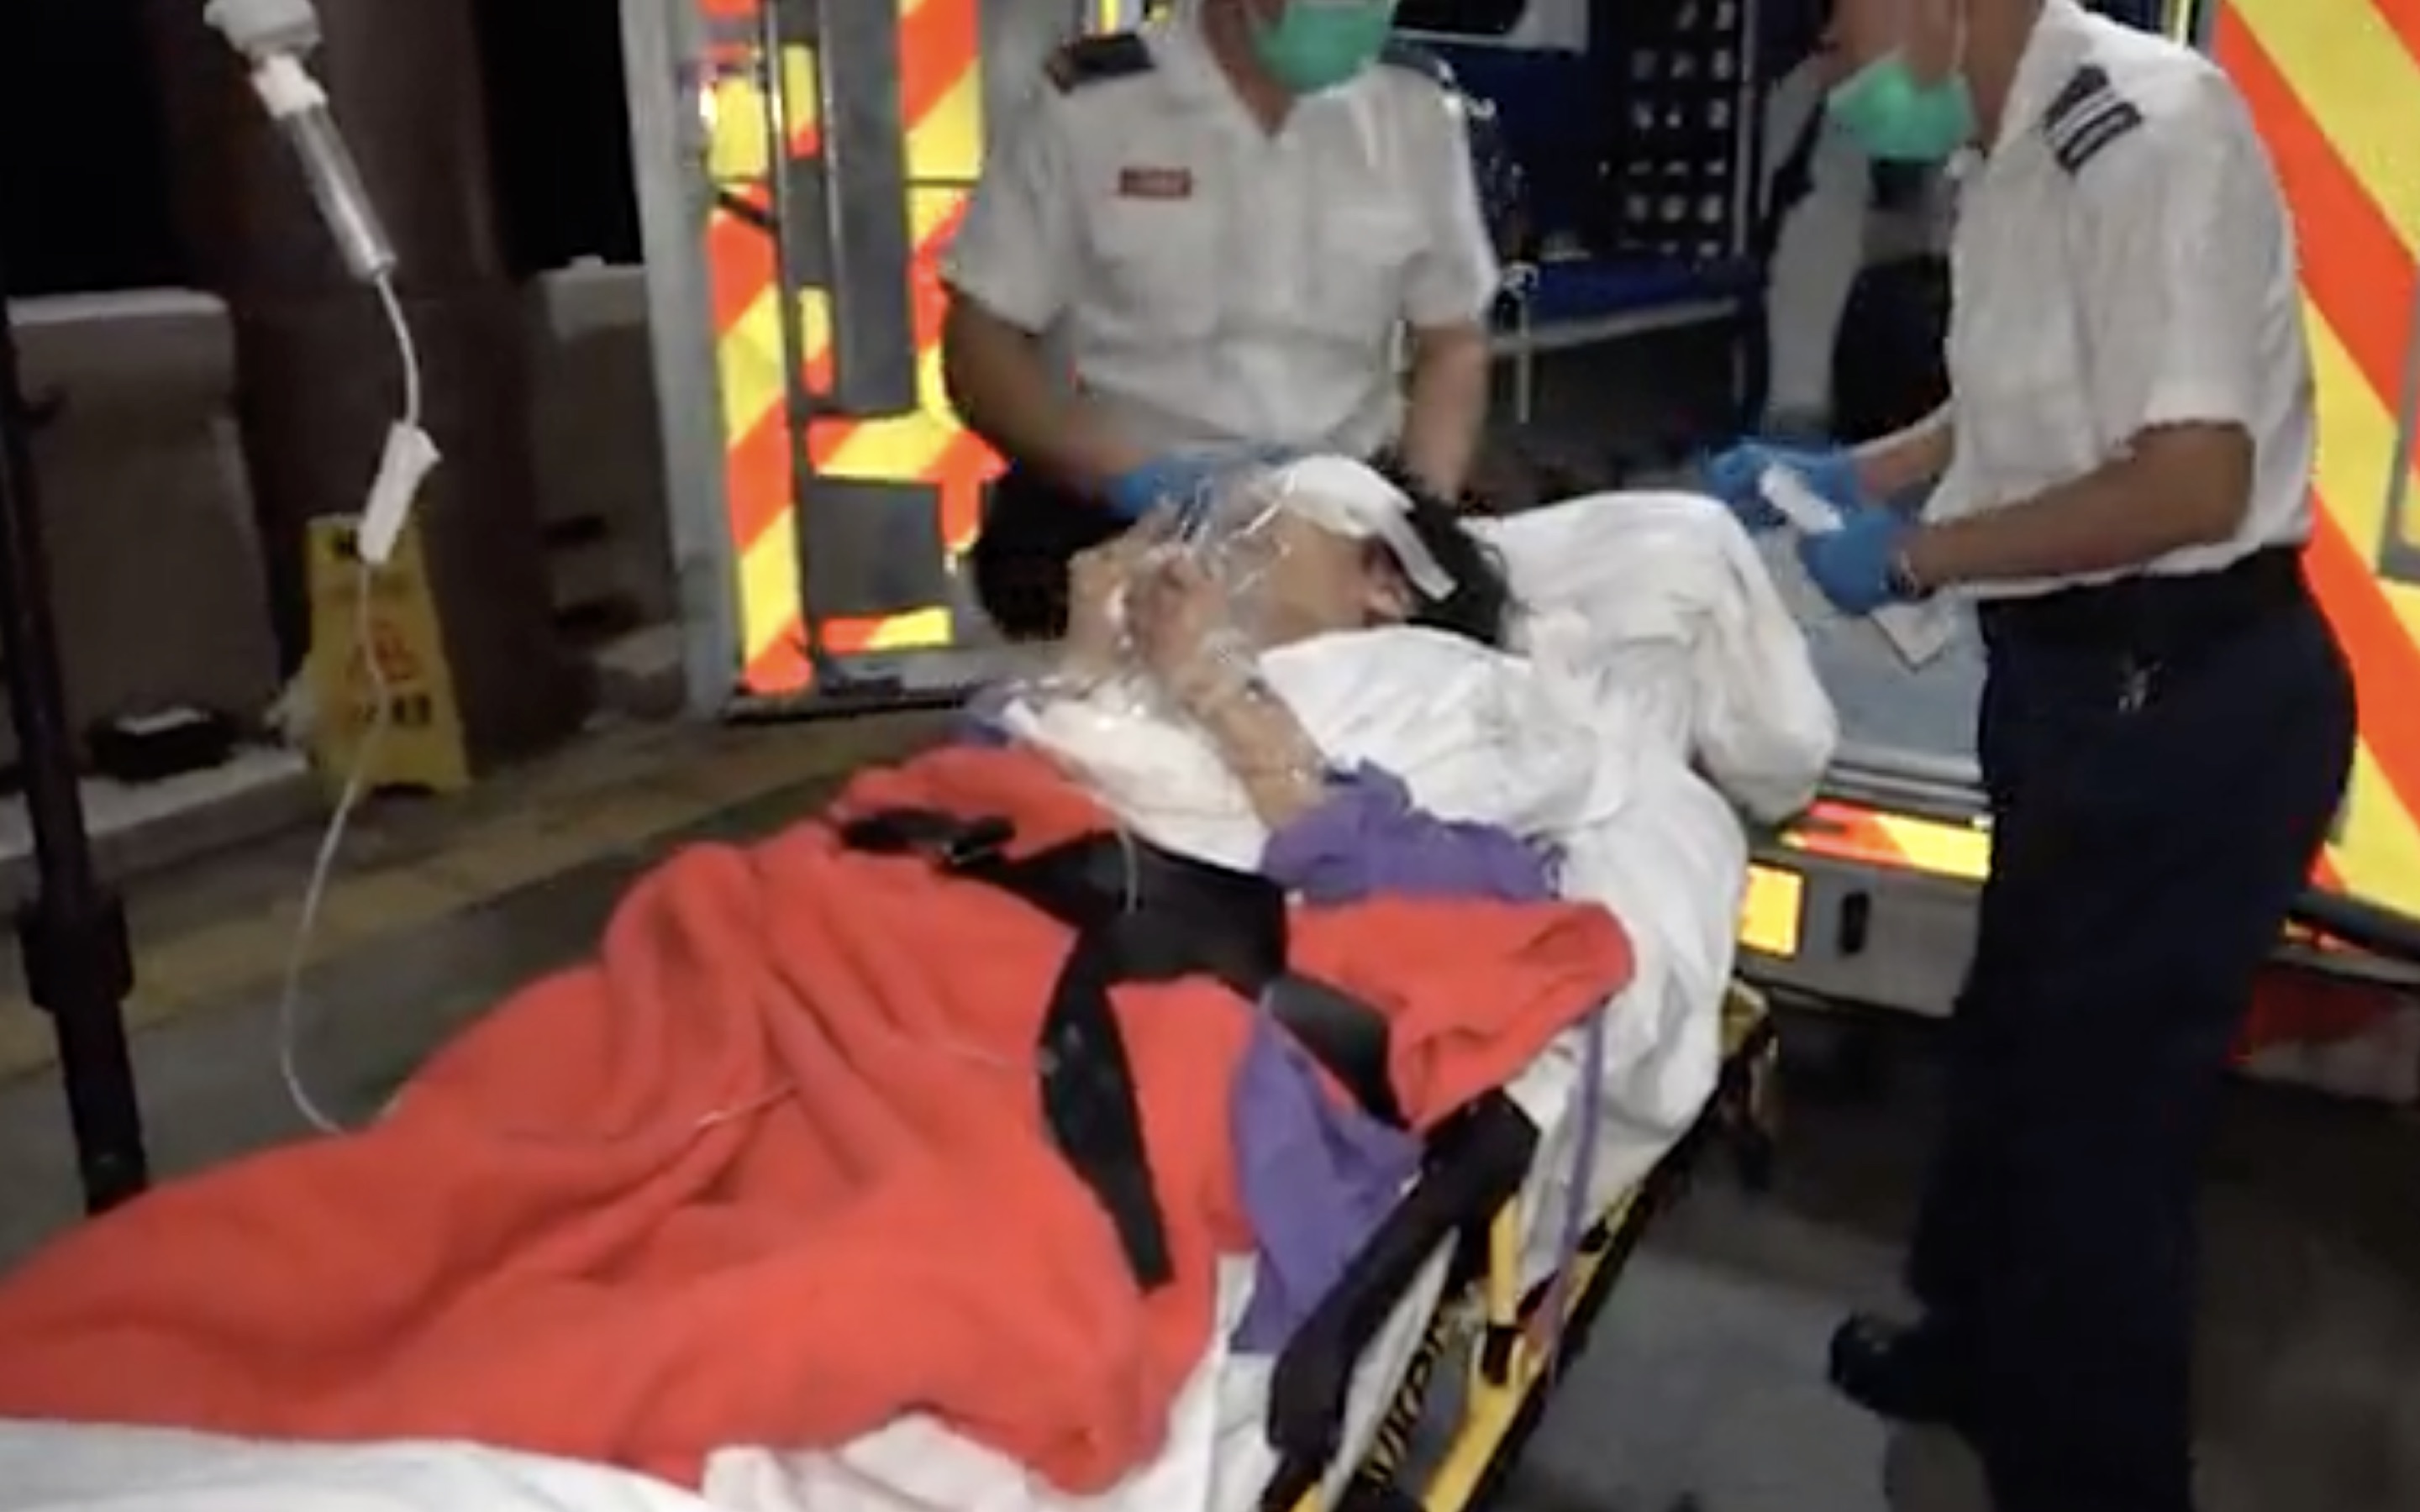 An elderly woman was taken to hospital after having her eye taken out. Screengrab via Apple Daily video.